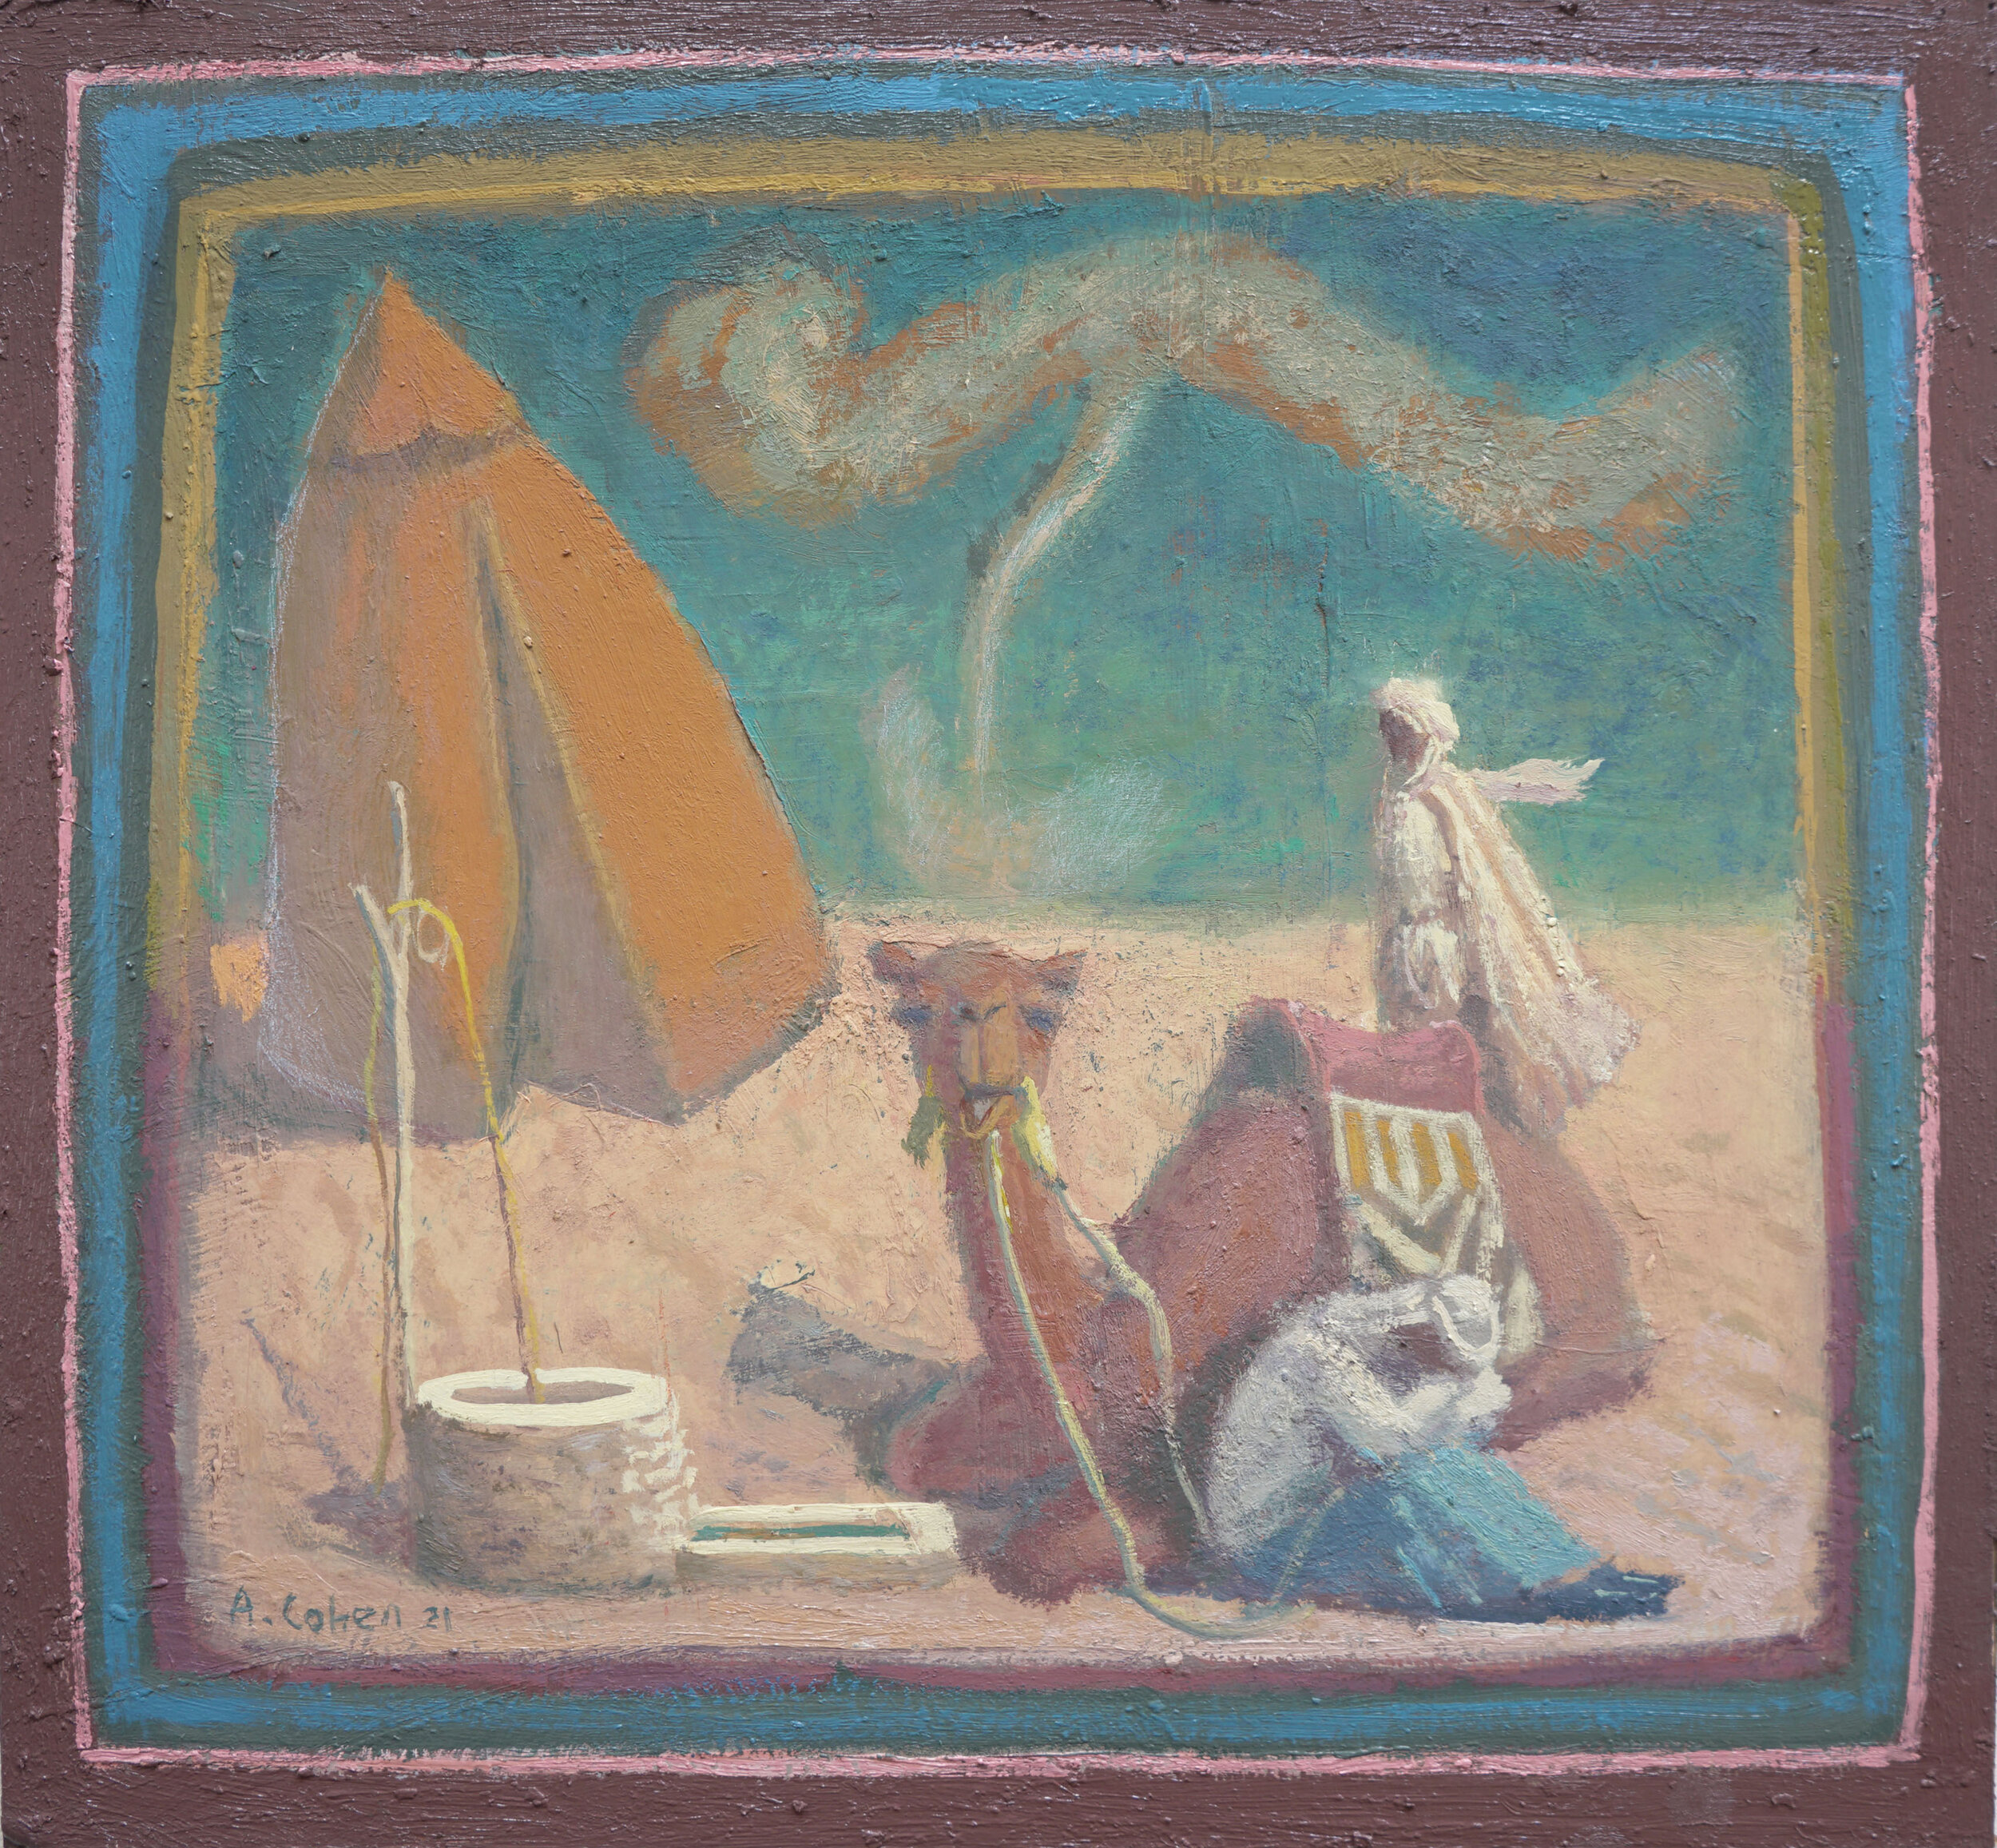 Desert Scene with Well, 12" x 13.5", Oil on Museum-Board, 2021 (SOLD)